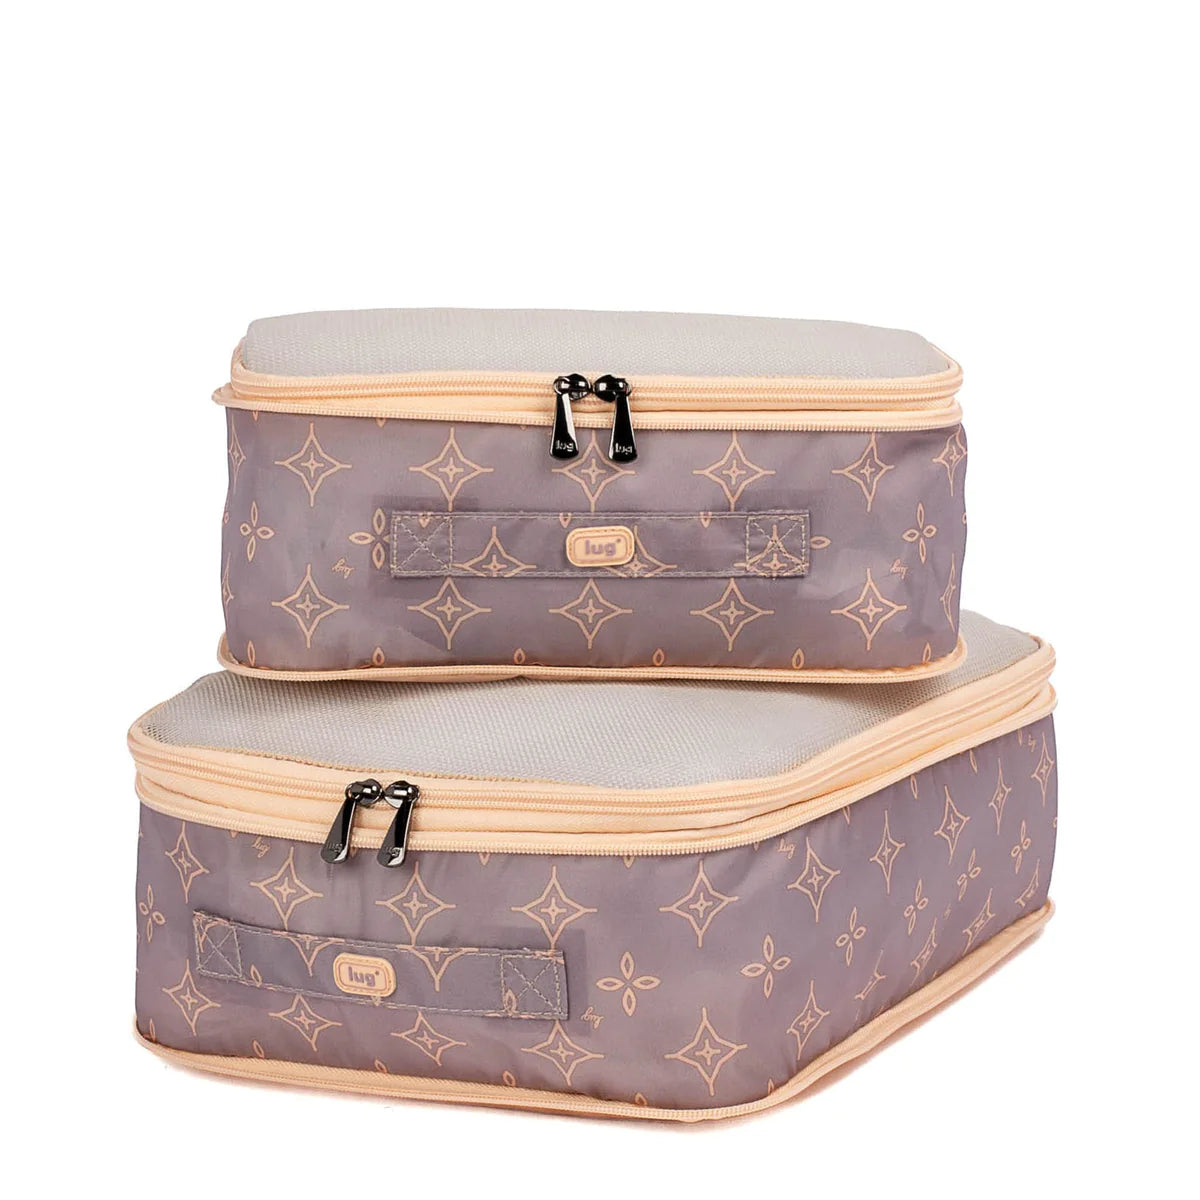 LUG Cargo 2pc Compression Packing Cubes in Metallic Rose